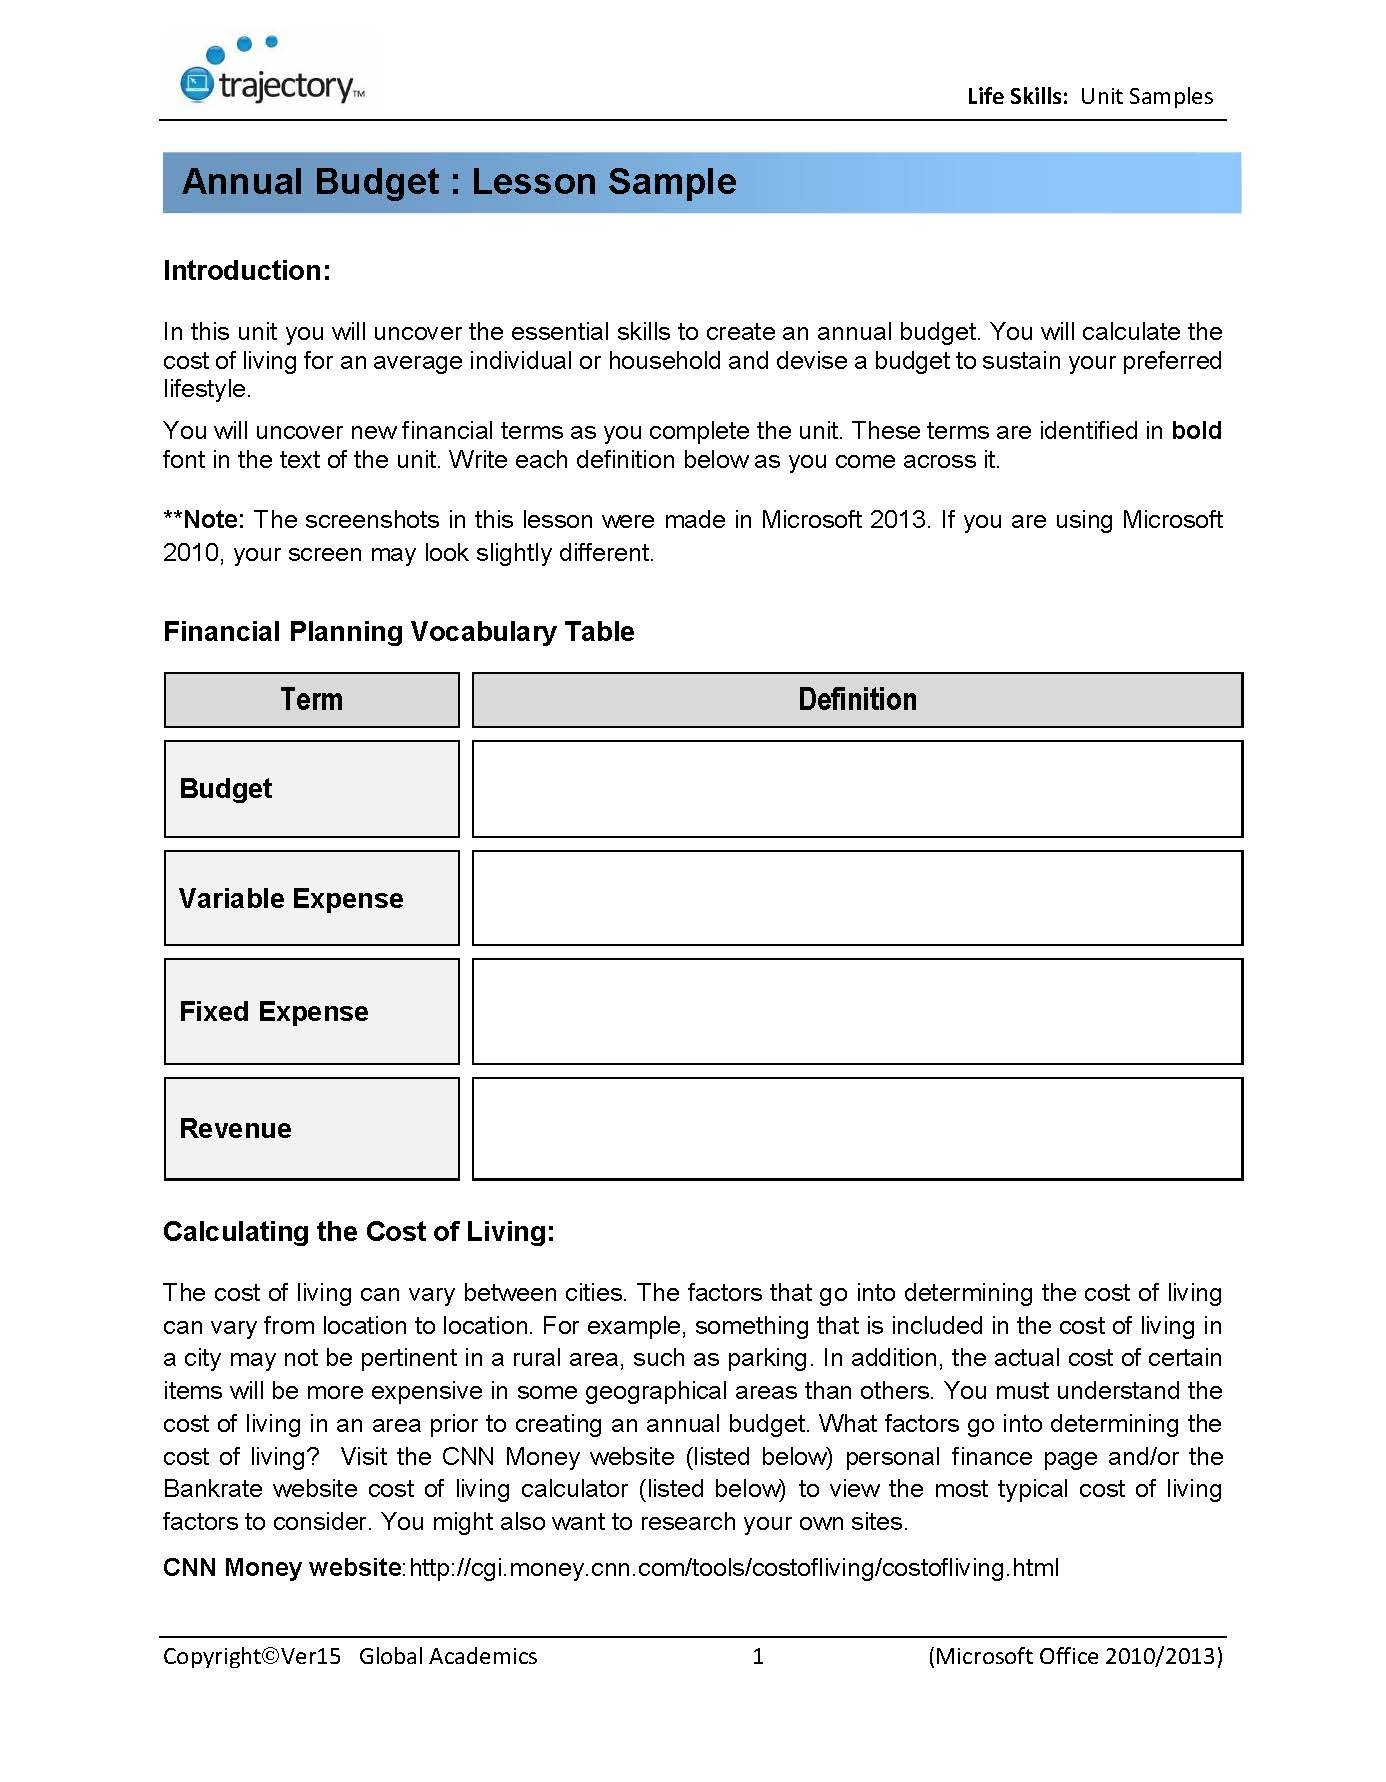 Trajectory Teachers The Curriculum Of Computer Technology For K8 With Life Skills Worksheets For Middle School Students